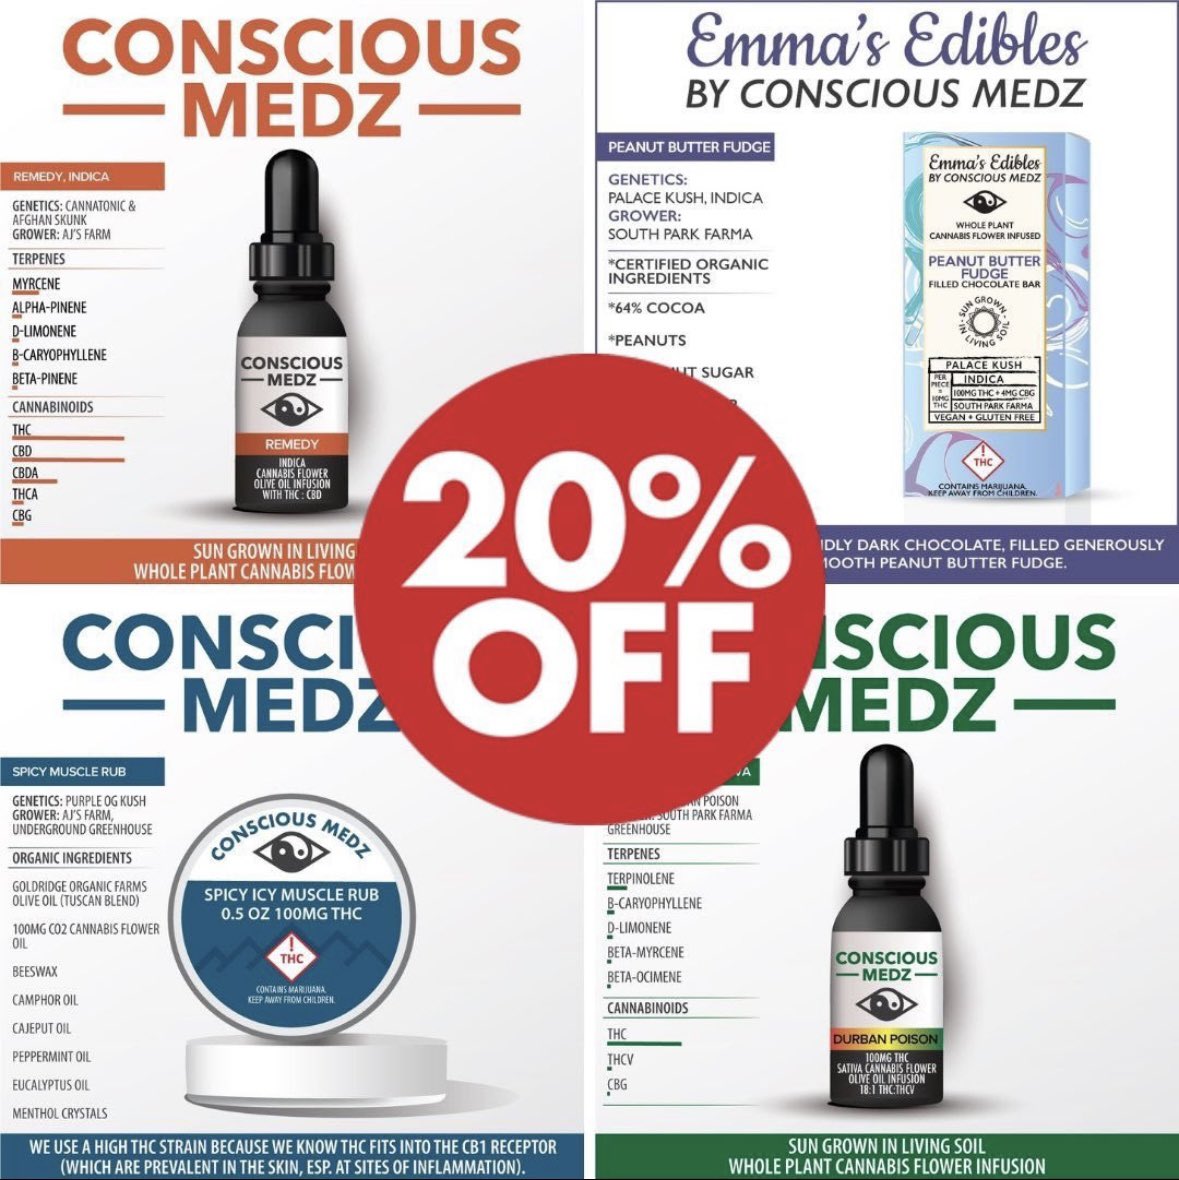 📢🌿🌞It's Conscious Saturday at Simply Pure! All #ConsciousMedz sun-grown vegan tinctures, edibles and topicals are 2⃣0⃣% off today!🌞🌿📢 #Denver #dispensary #cannabis #WomanOwned #CannabisCommunity #BlackOwned #VeteranOwned #cannabisindustry #cannabisculture #IAmAPurest